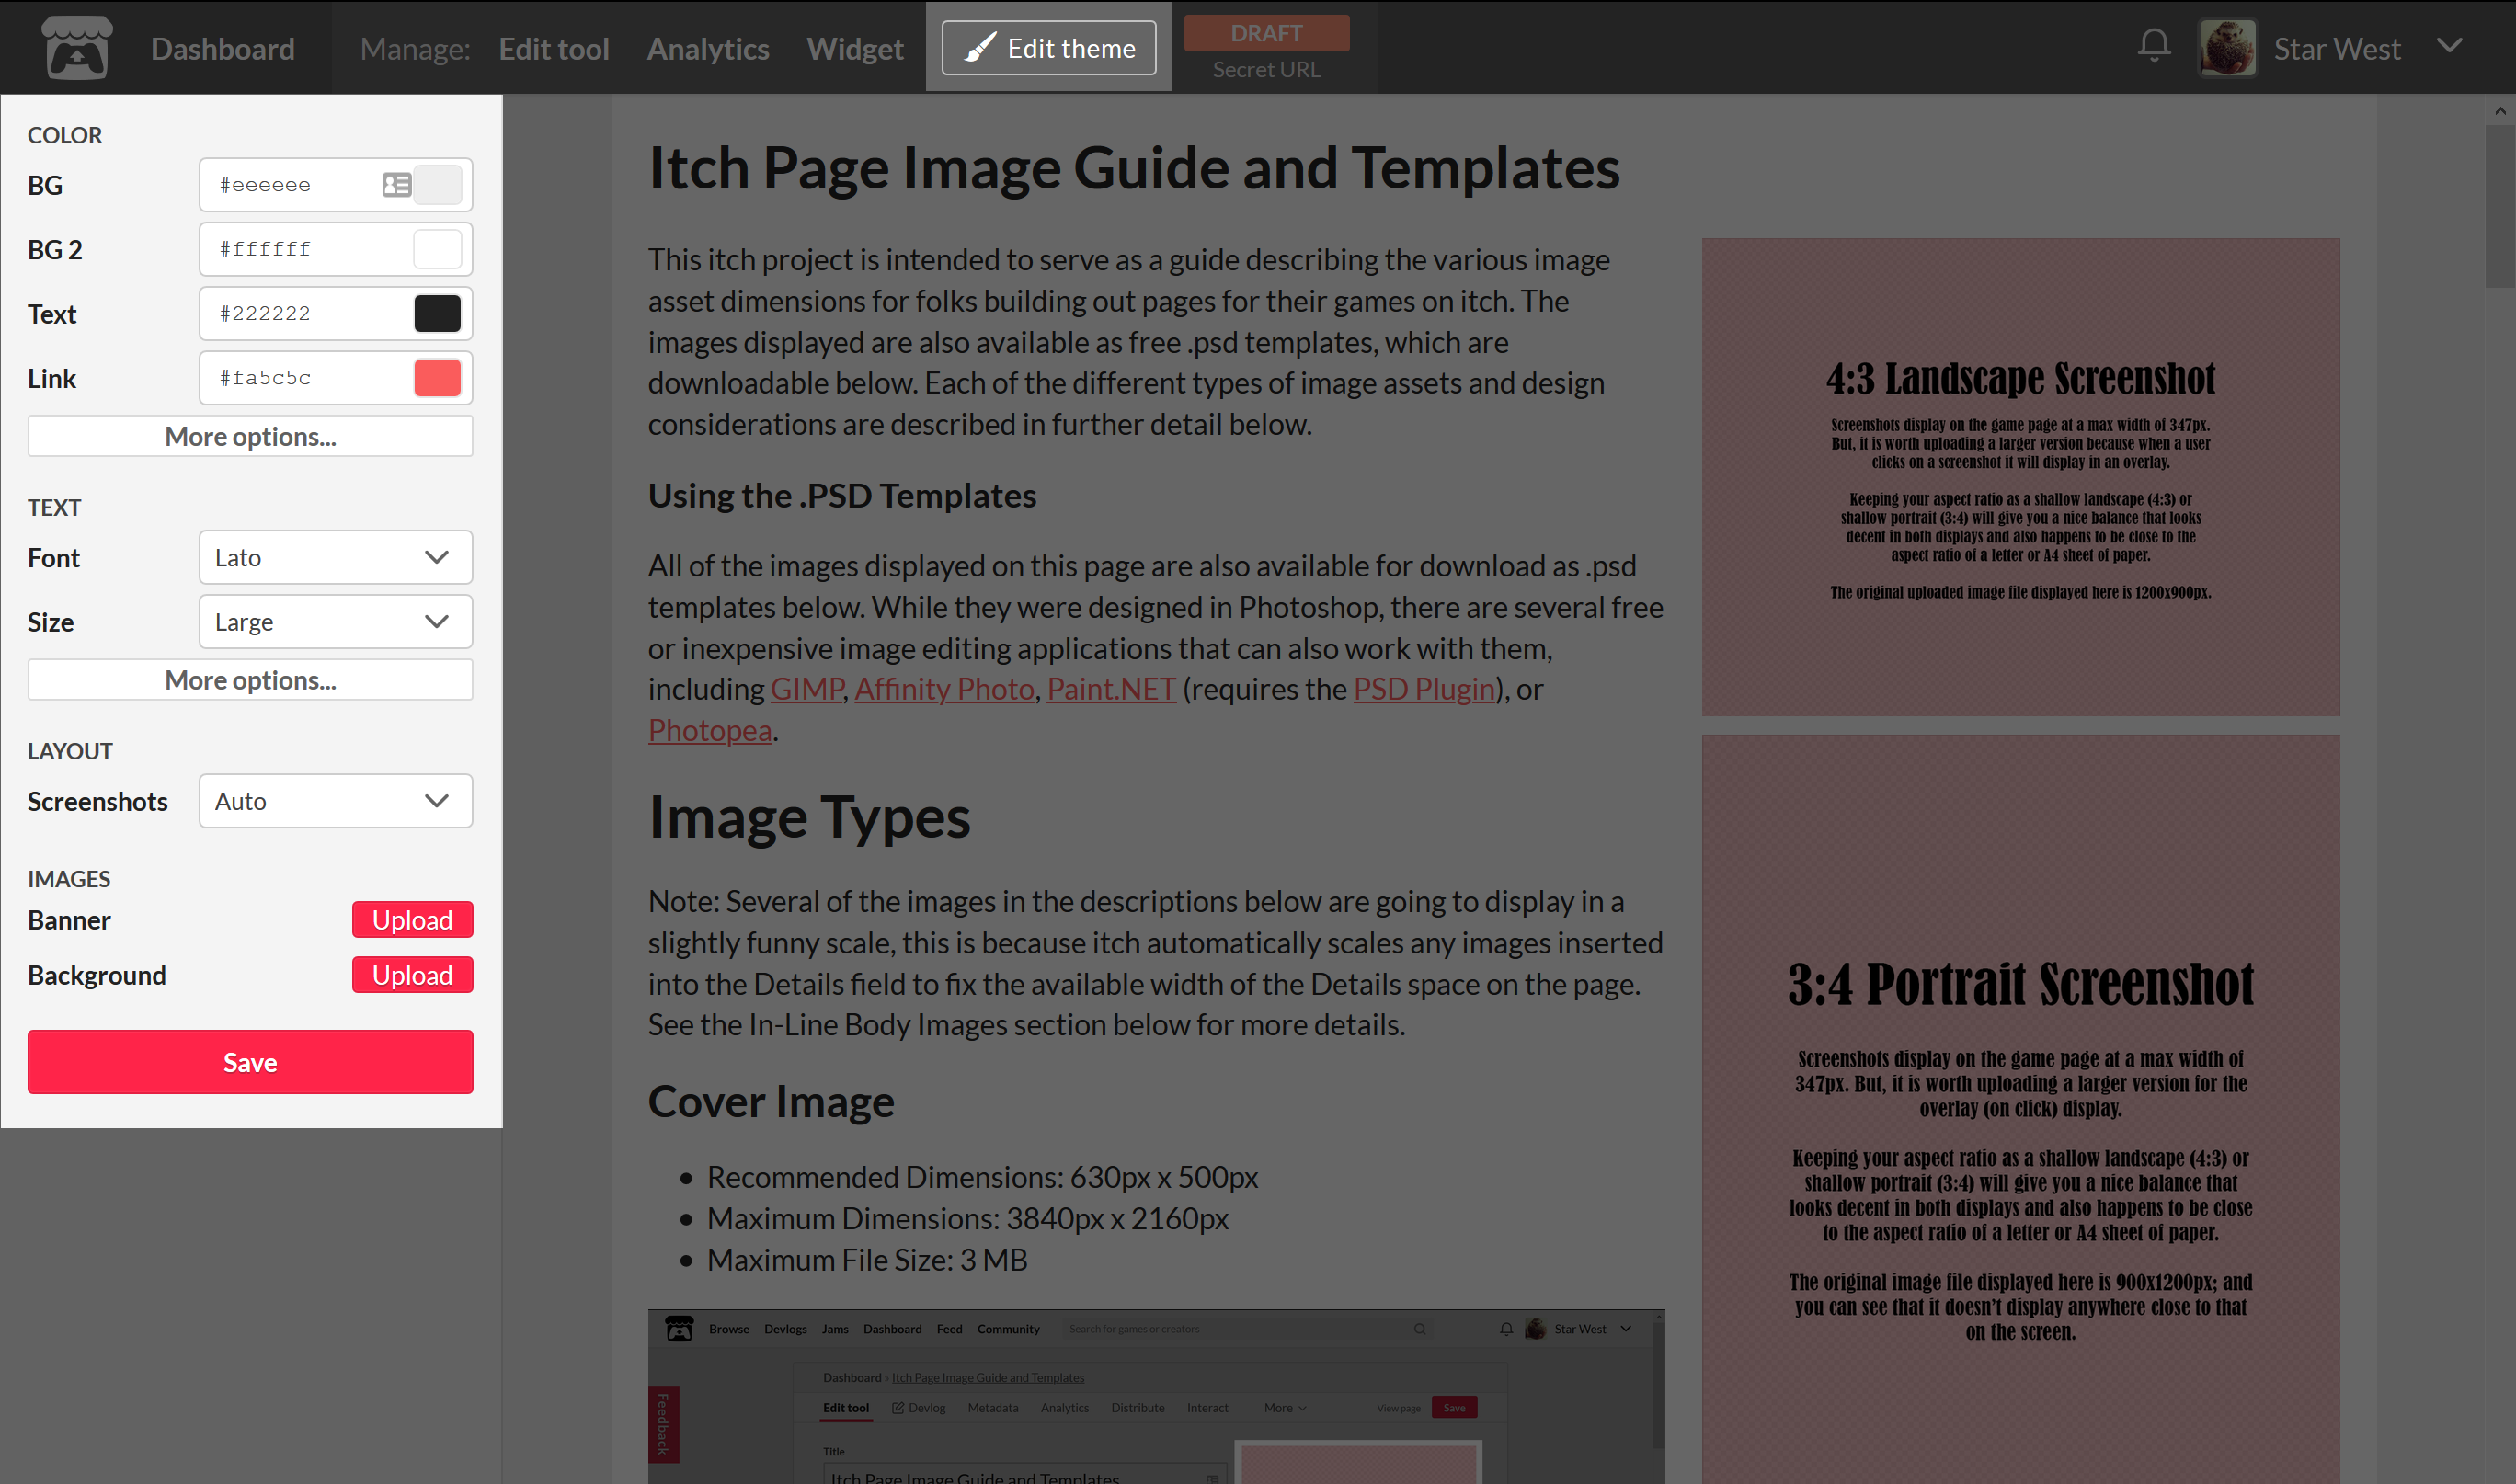 Itch Game Page Image Guide and Templates by Star West